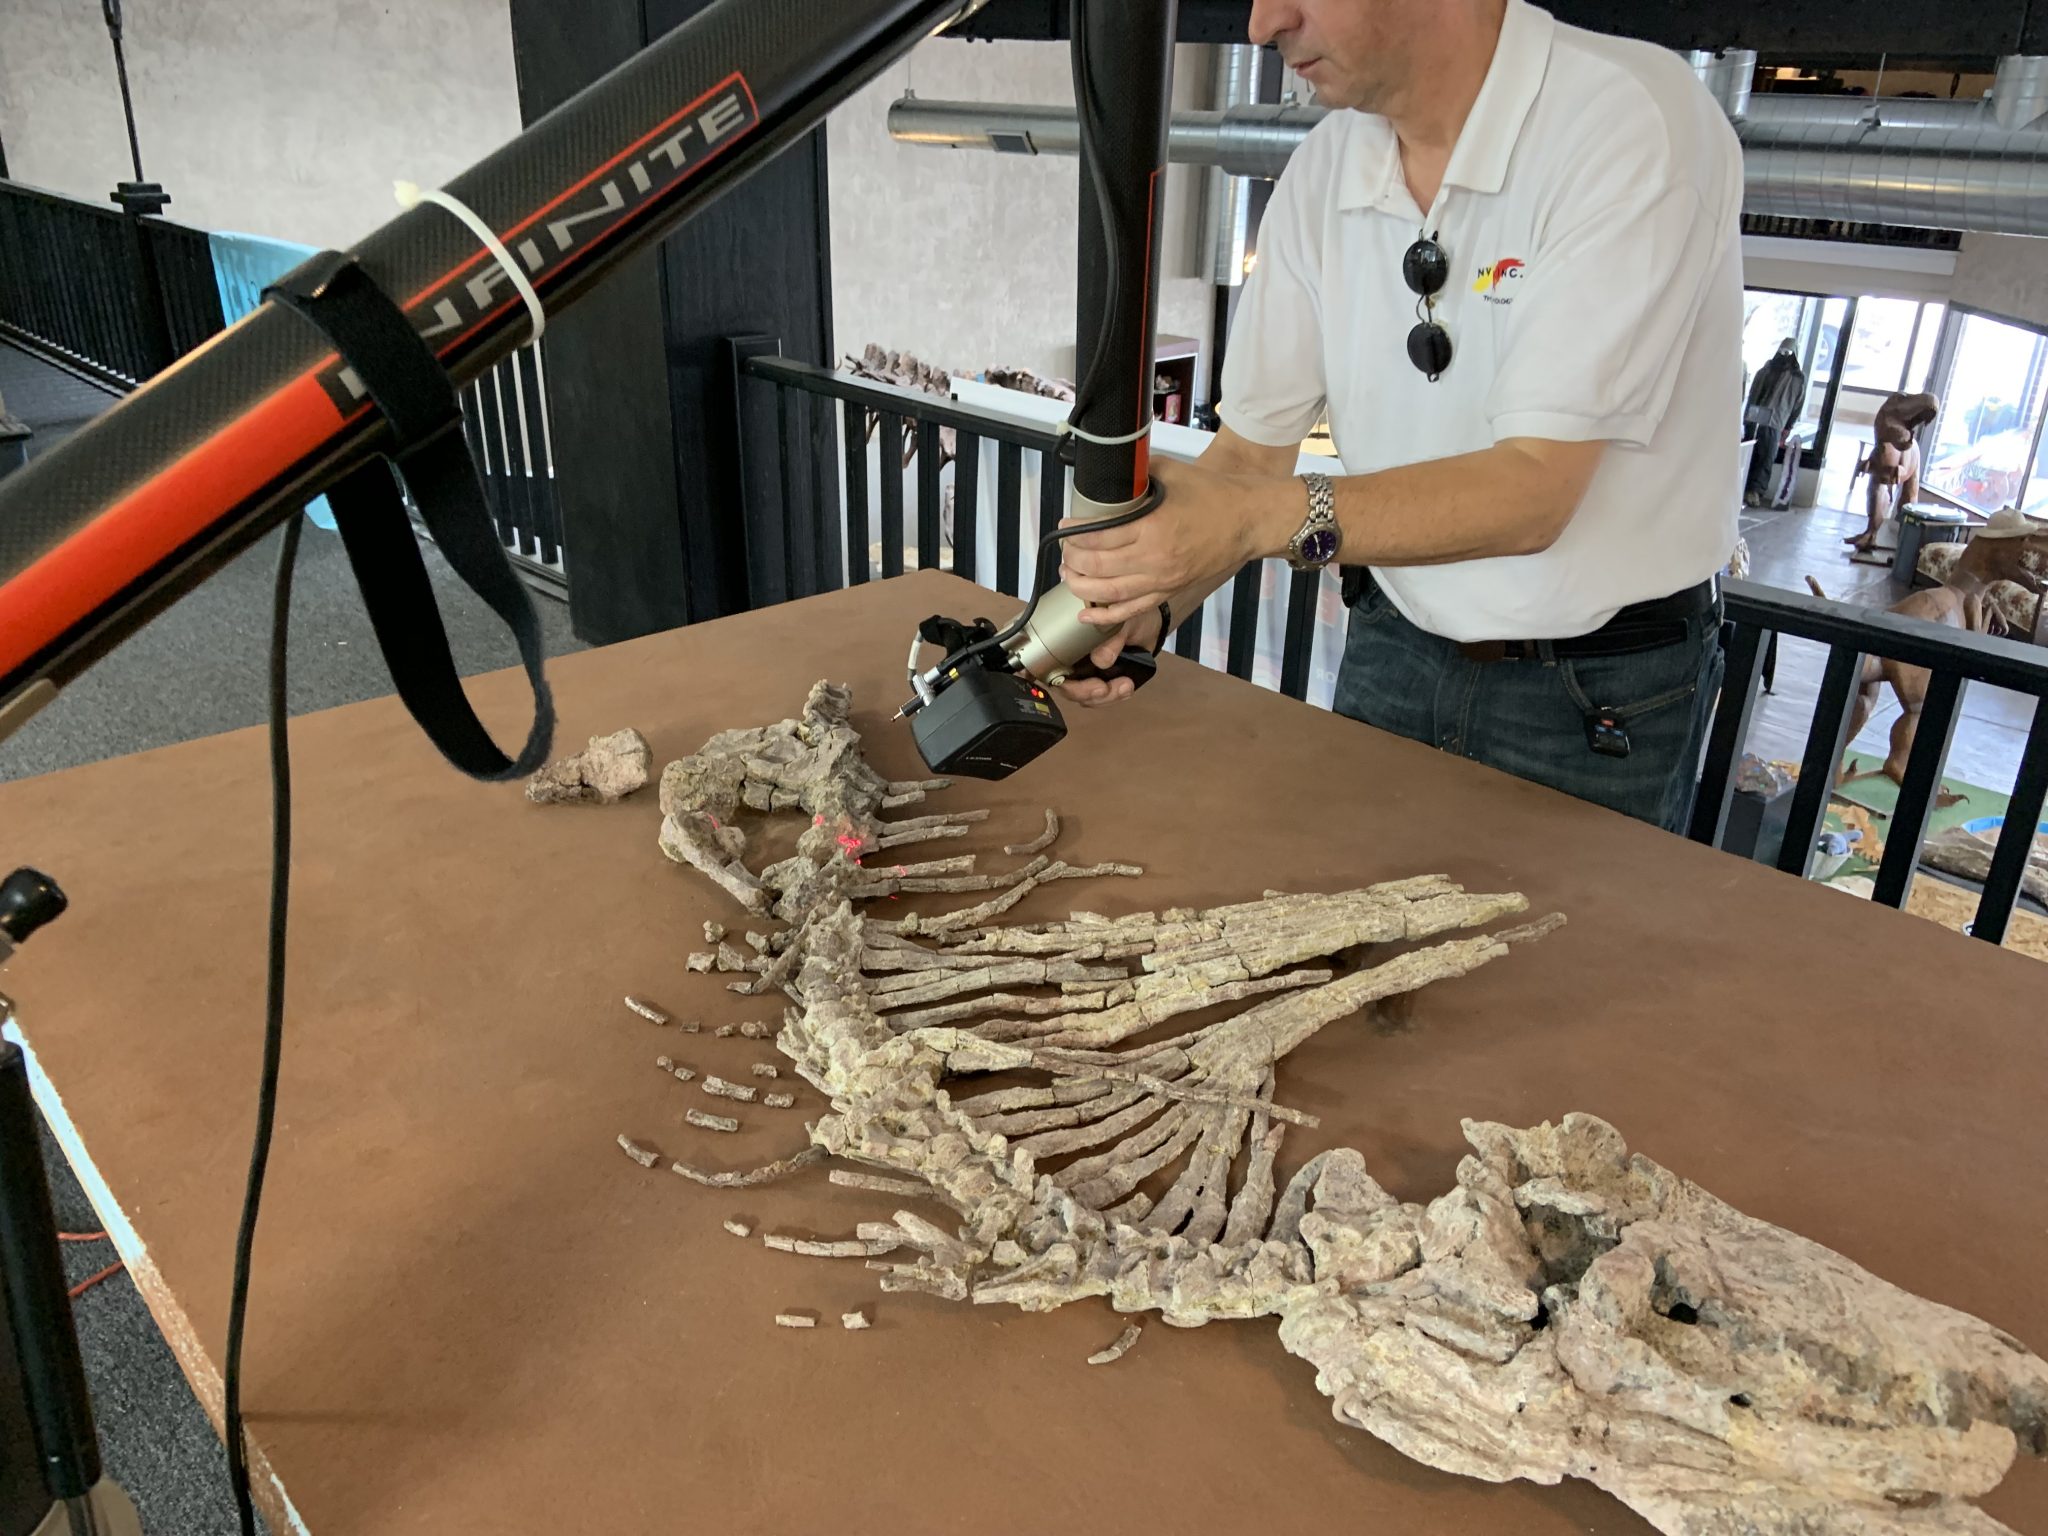 An NVision technician scans the Dimetrodon limbatus skeleton. Note the creature's elongated back spines, which face the technician. Photo via NVision.